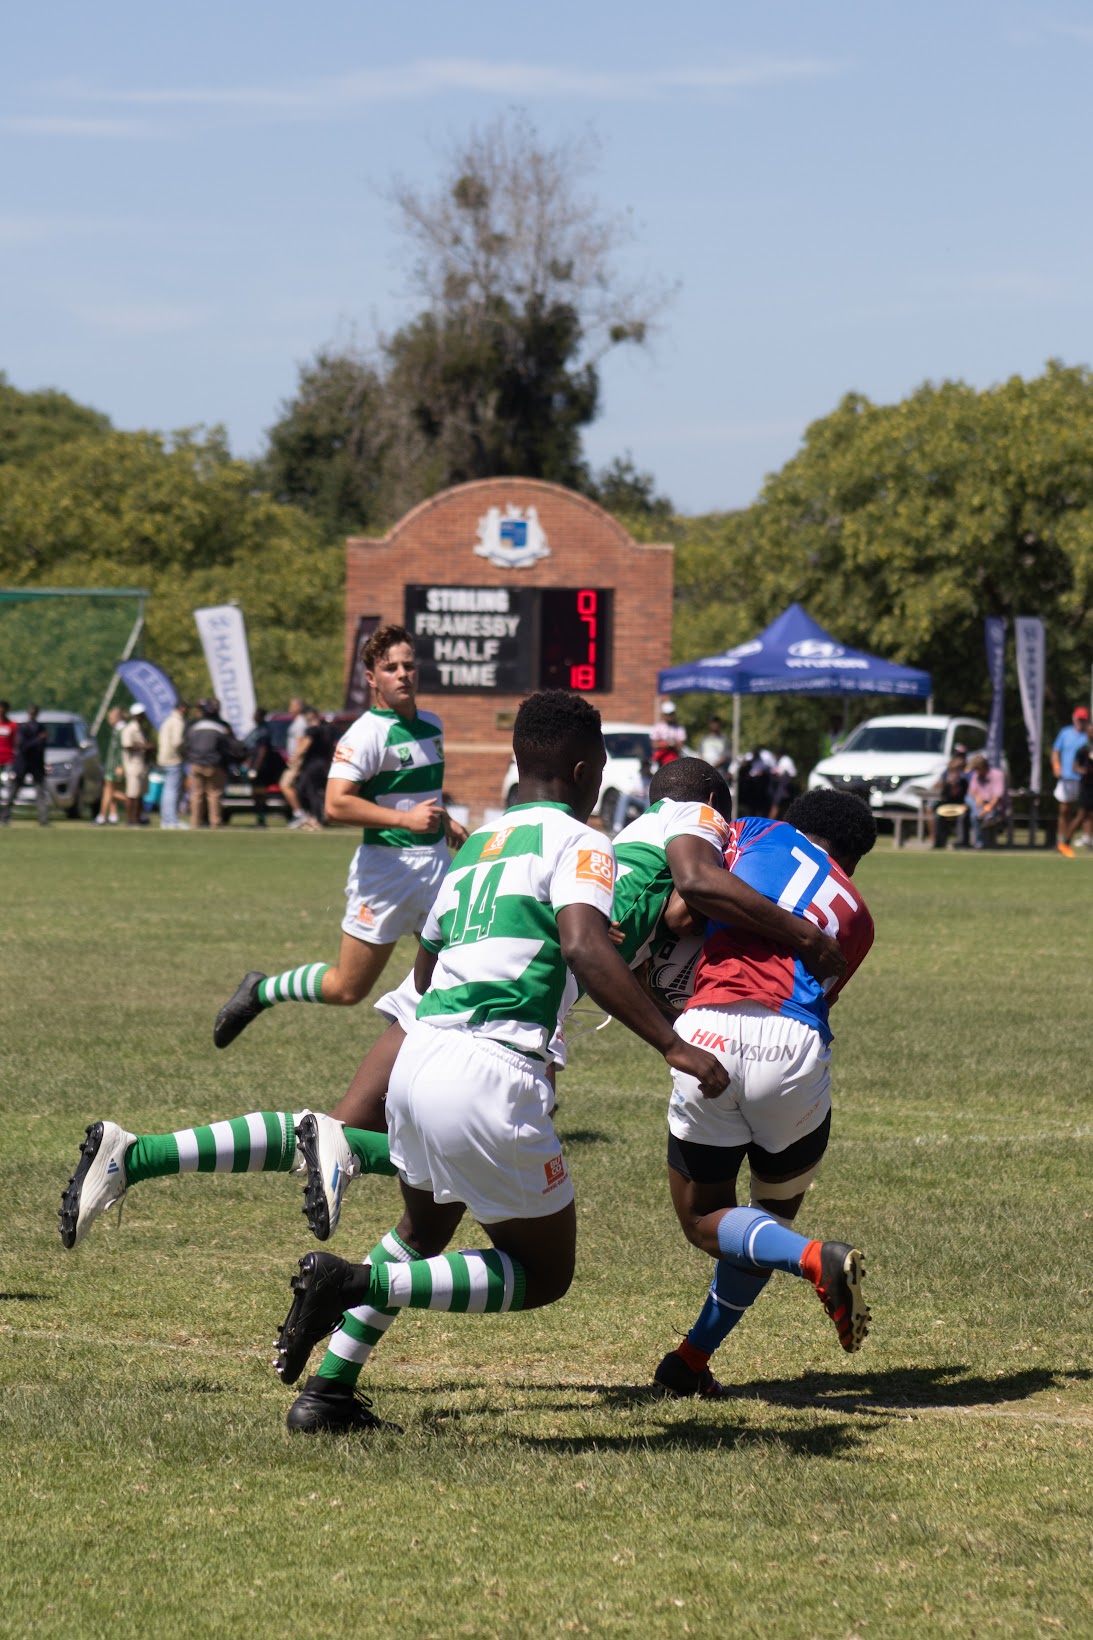 Stirling High school vs Hoërskool Framesby at Graeme college rugby festival on Saturday, 16 March. Photo: Rikie Lai